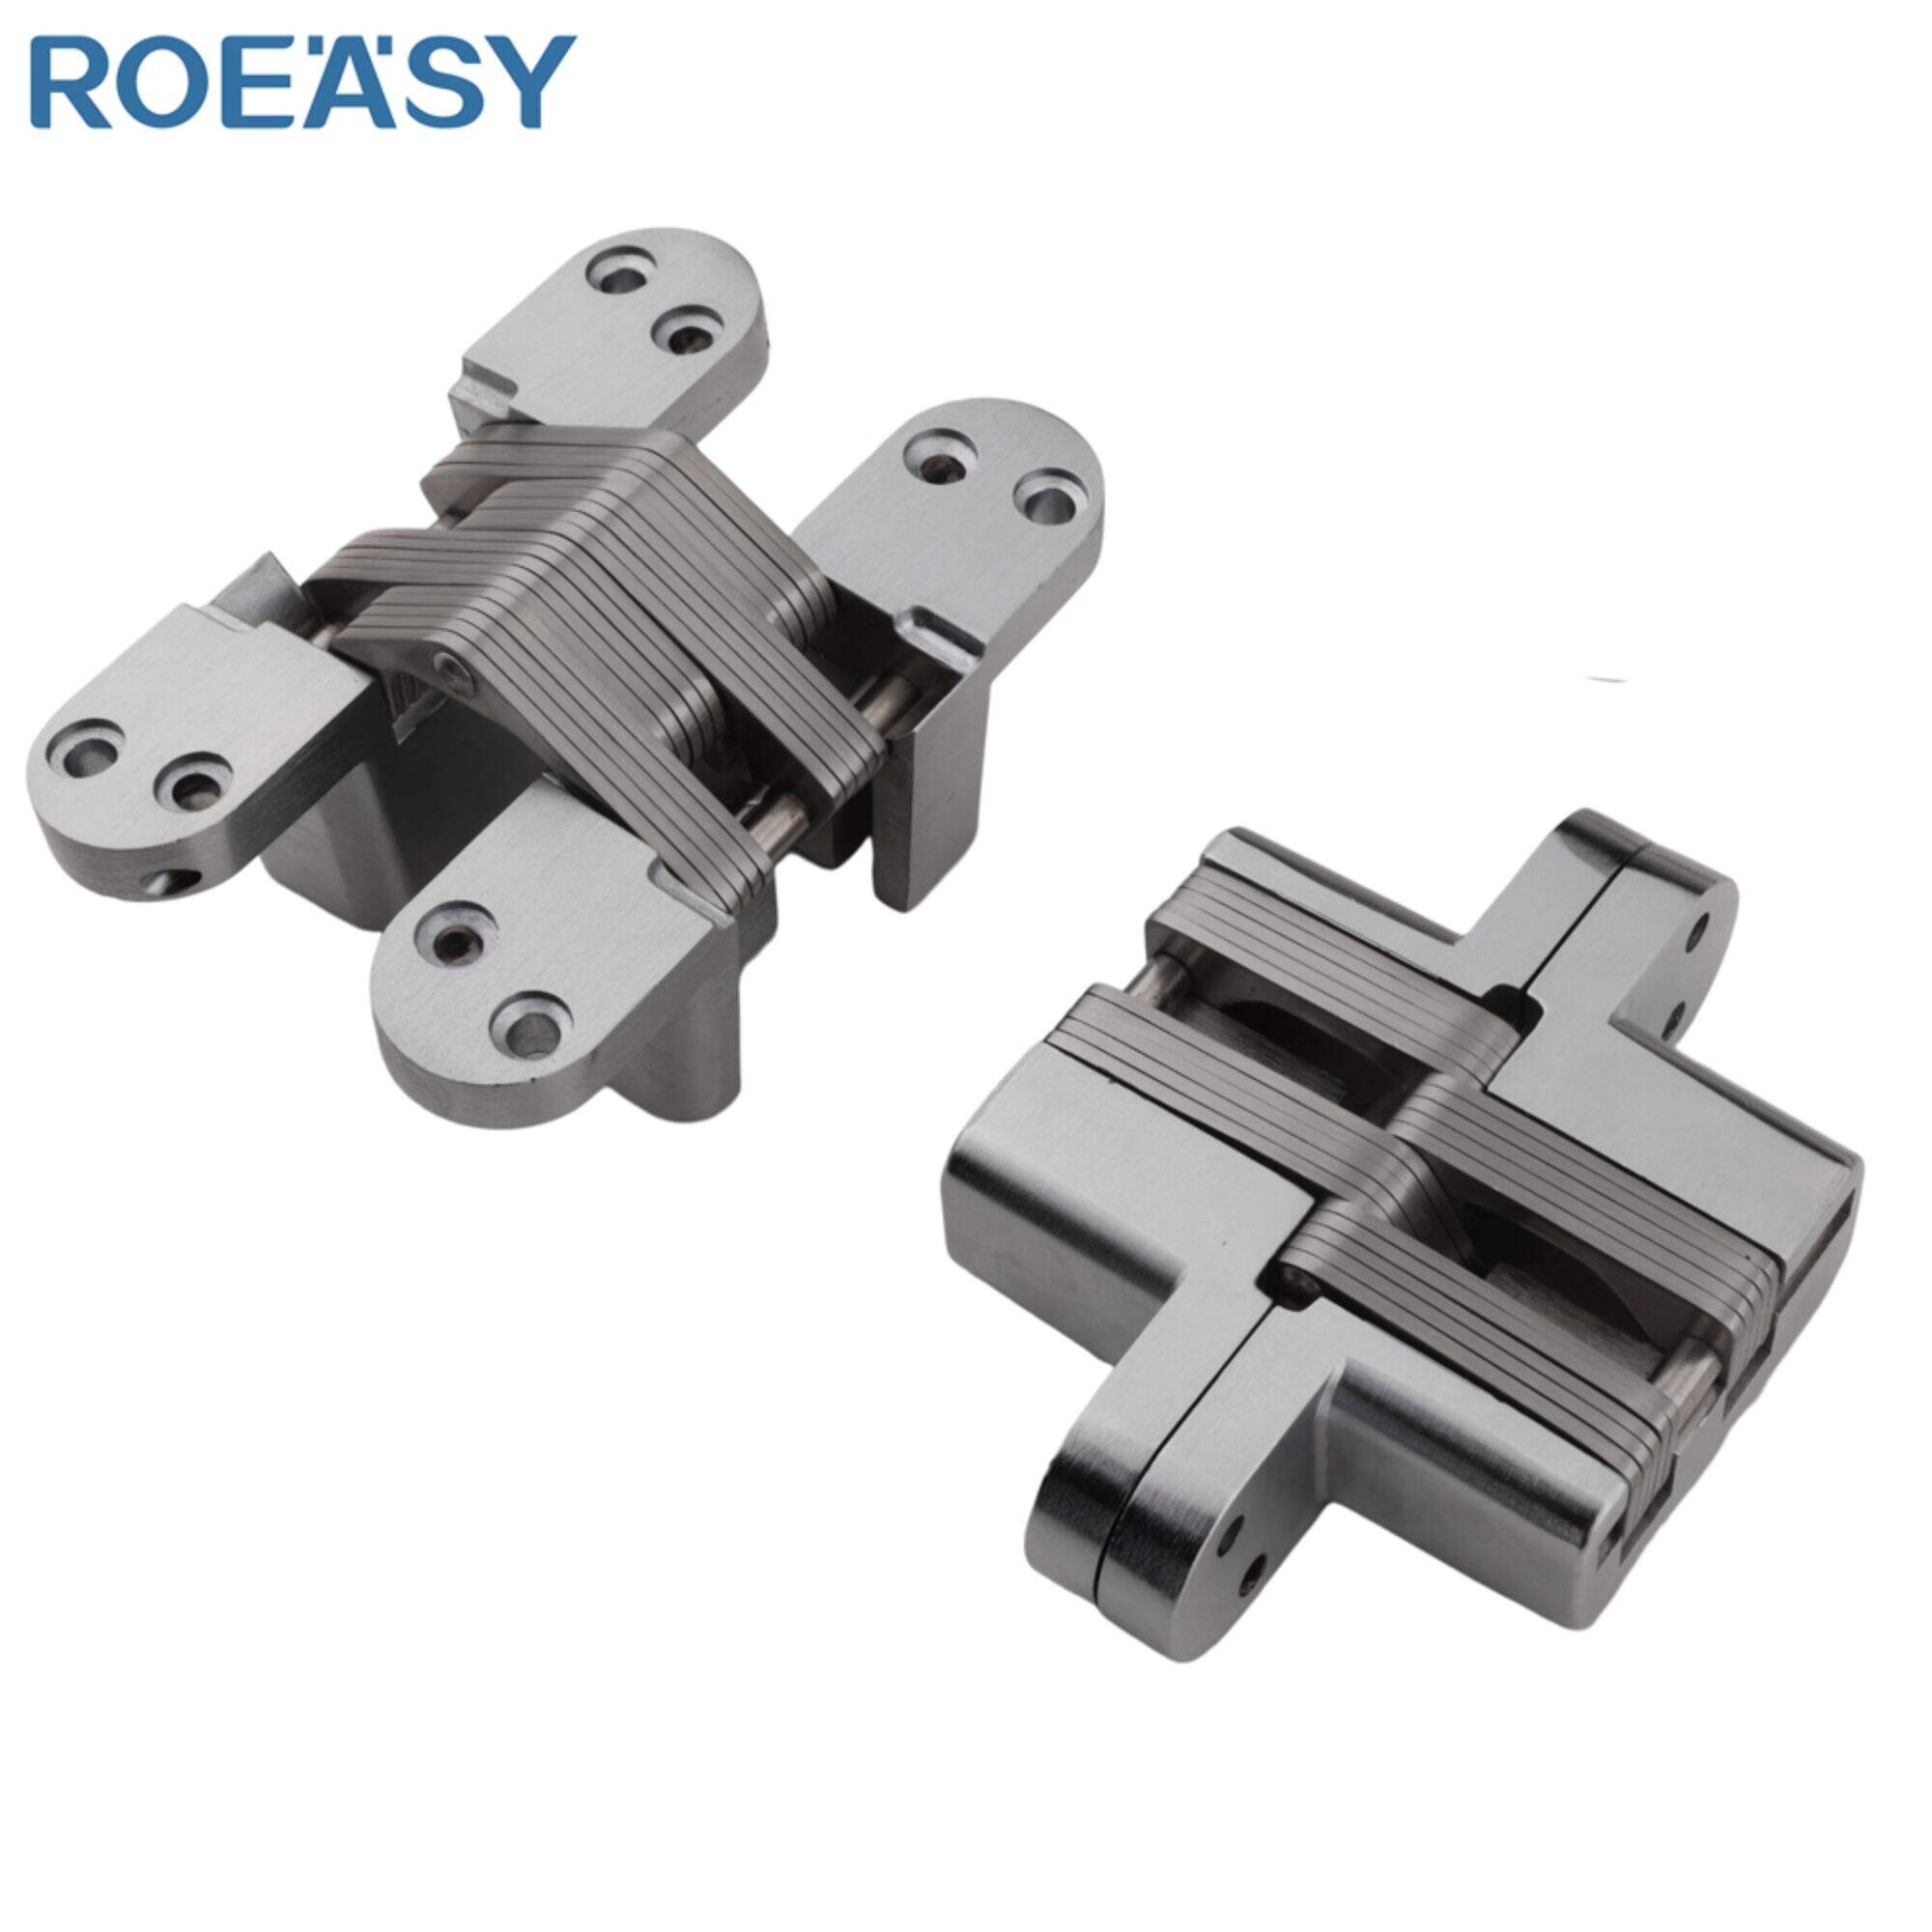 ROEASY AG001 High Quality Furniture Hinge Hydraulic Folding Die Casting Door Hinge Concealed Invisible Hinge for Door